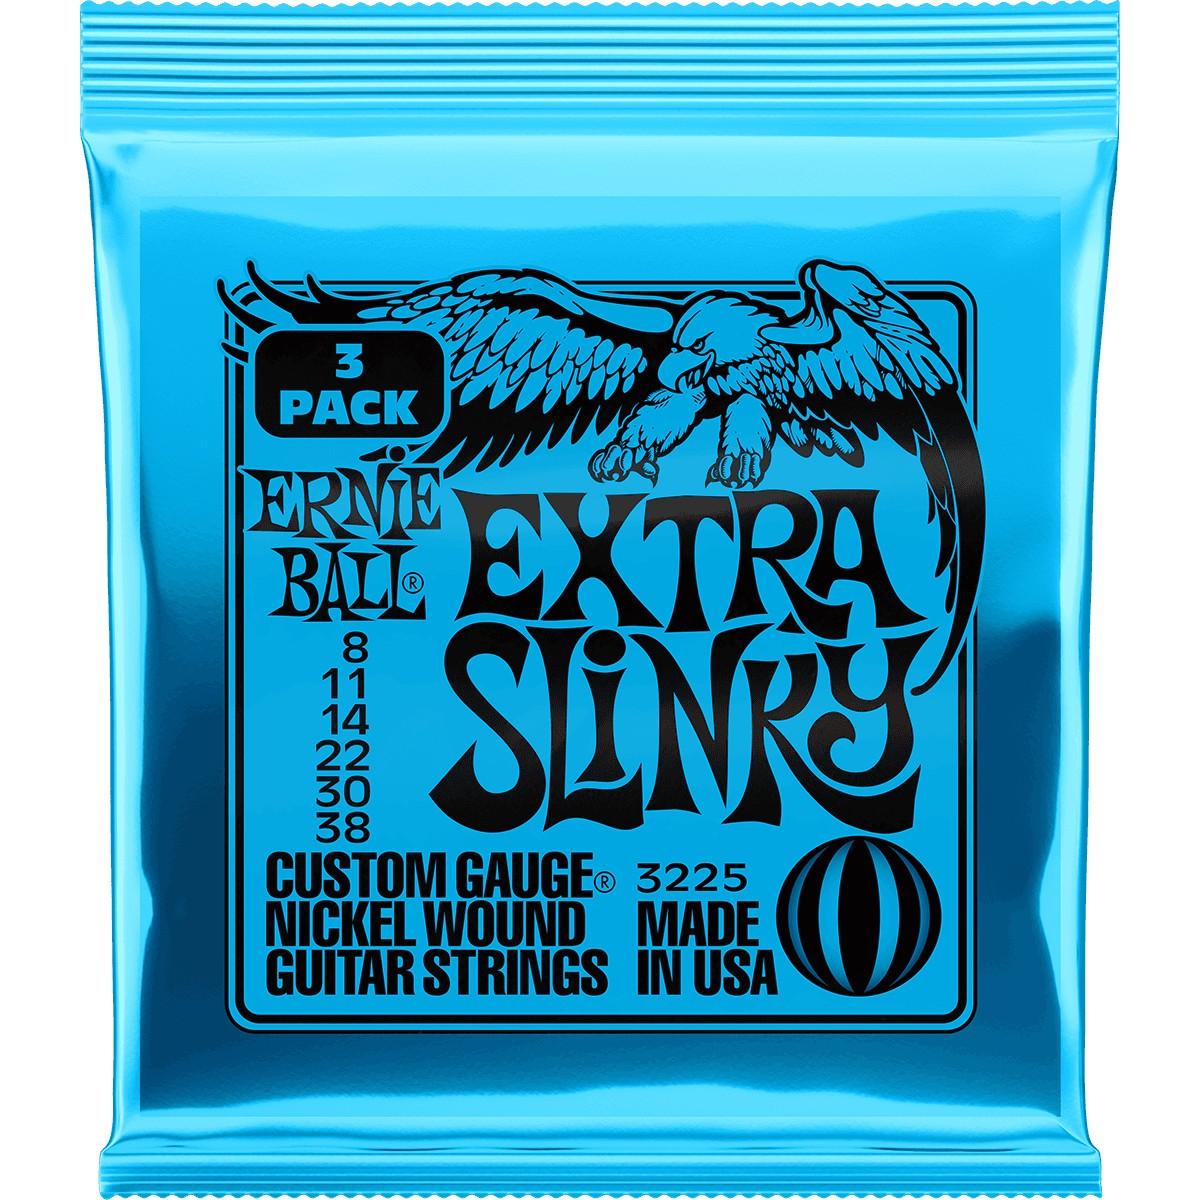 ERNIE BALL Cordes Electriques Slinky Nickel Wound Pack